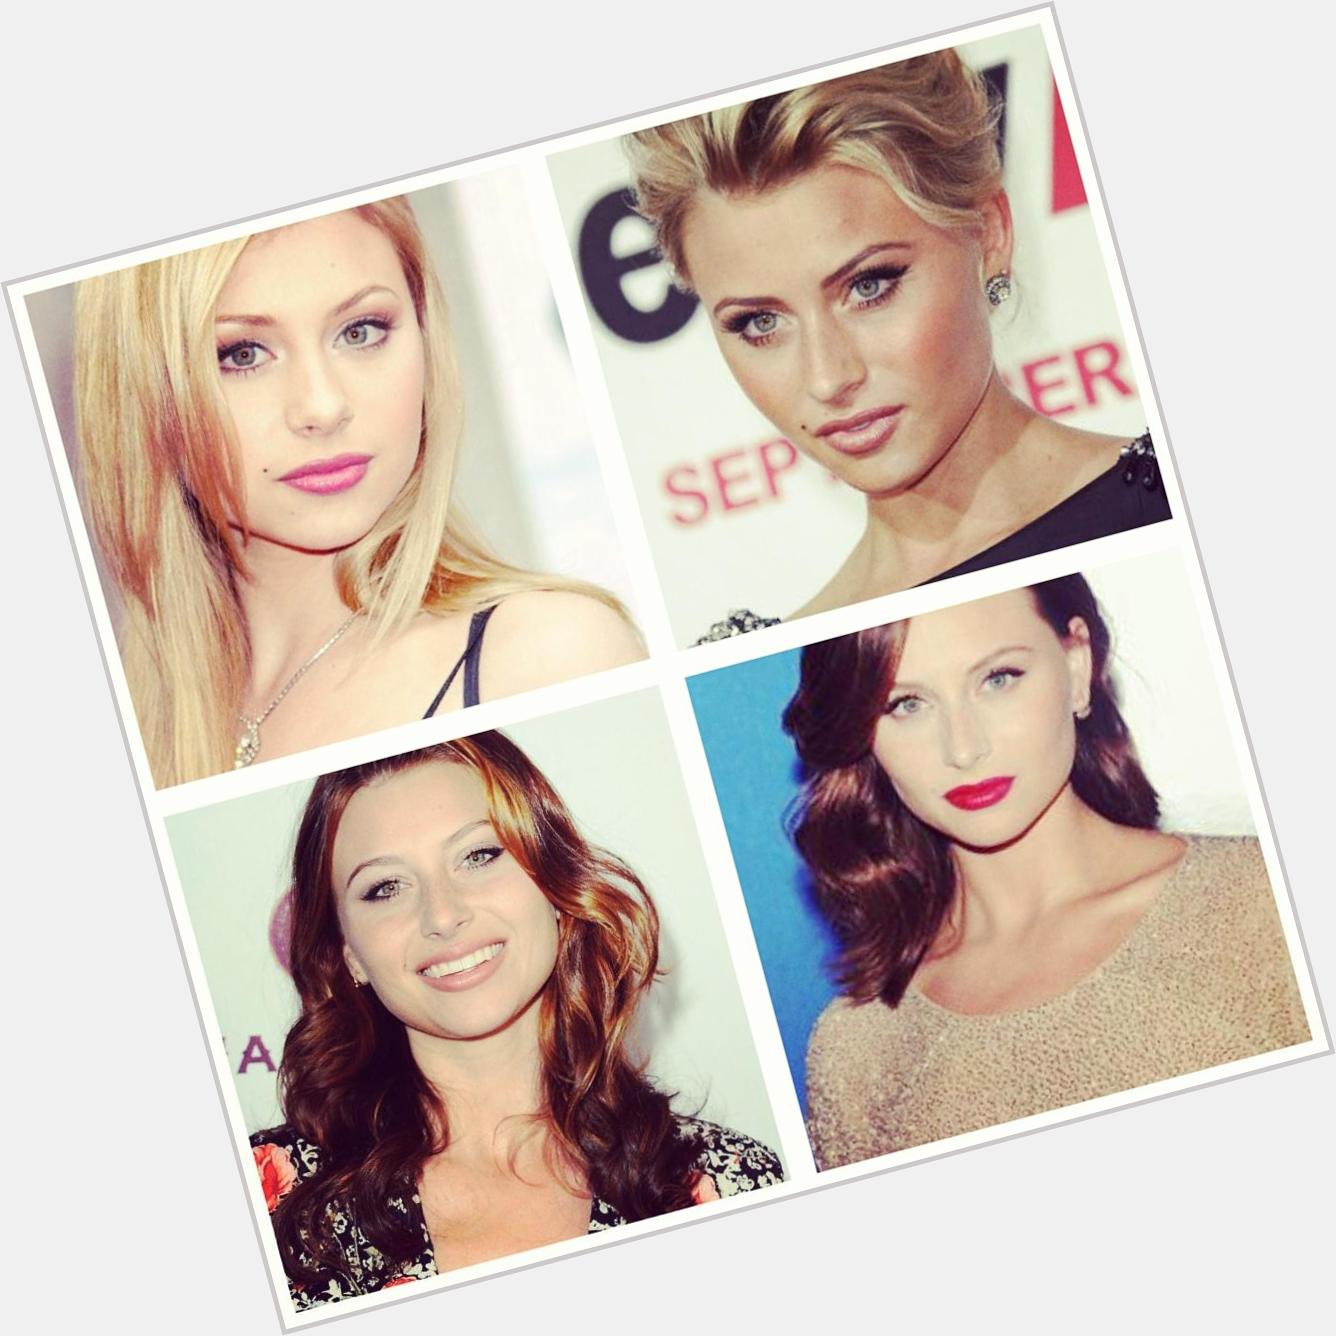 Happy Birthday Aly Michalka! We love you so much! WE ARE PROUD OF YOU   